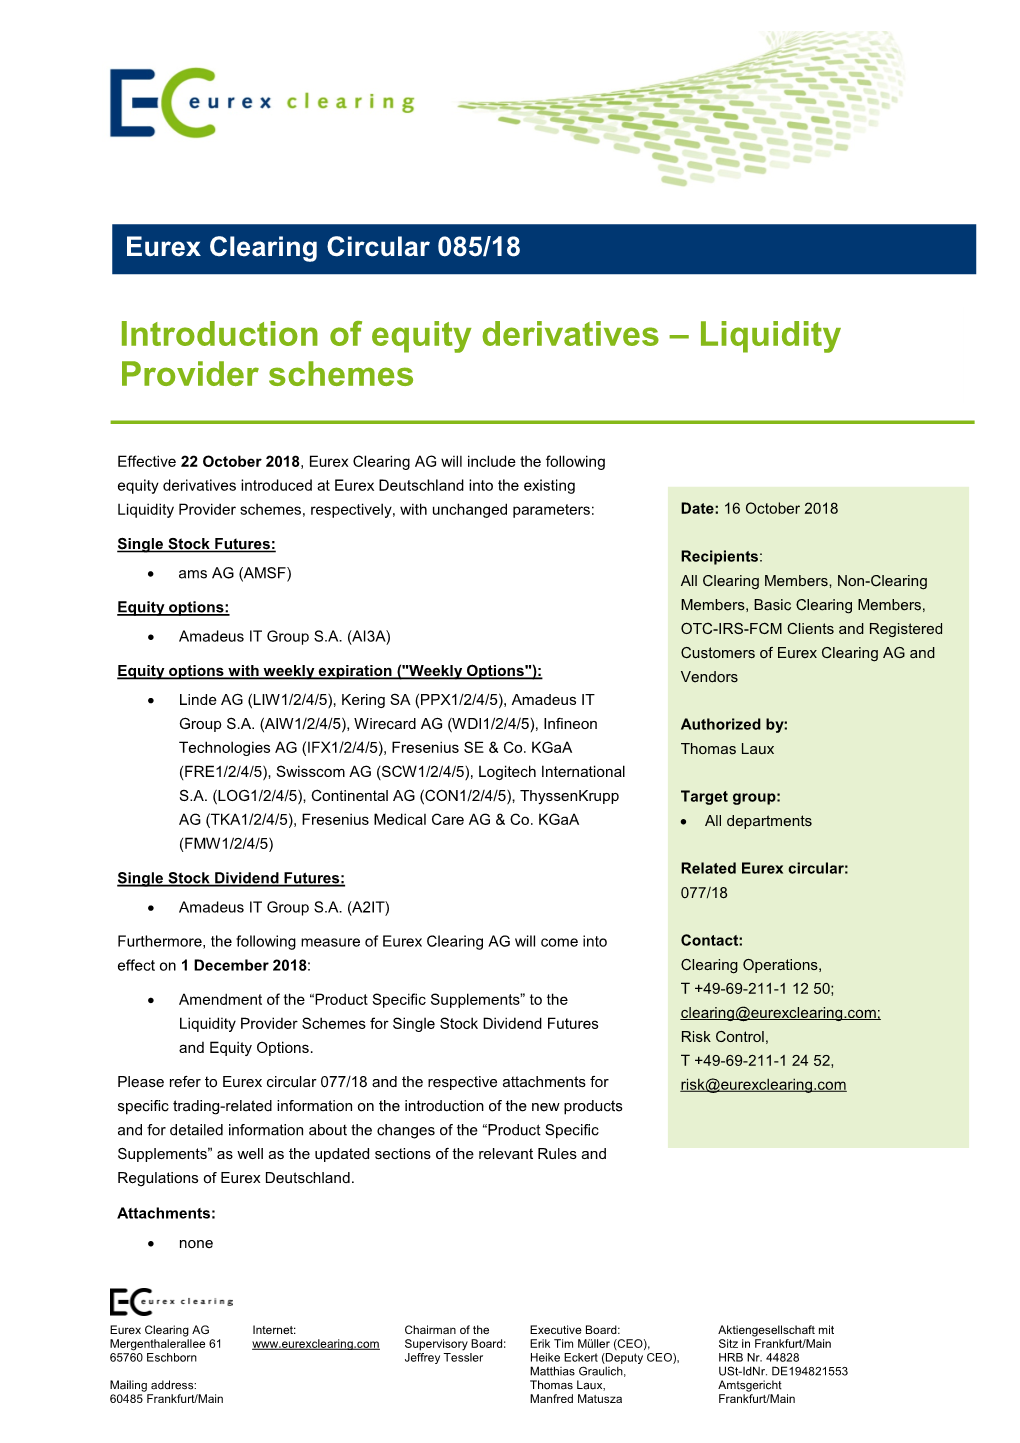 Introduction of Equity Derivatives – Liquidity Provider Schemes